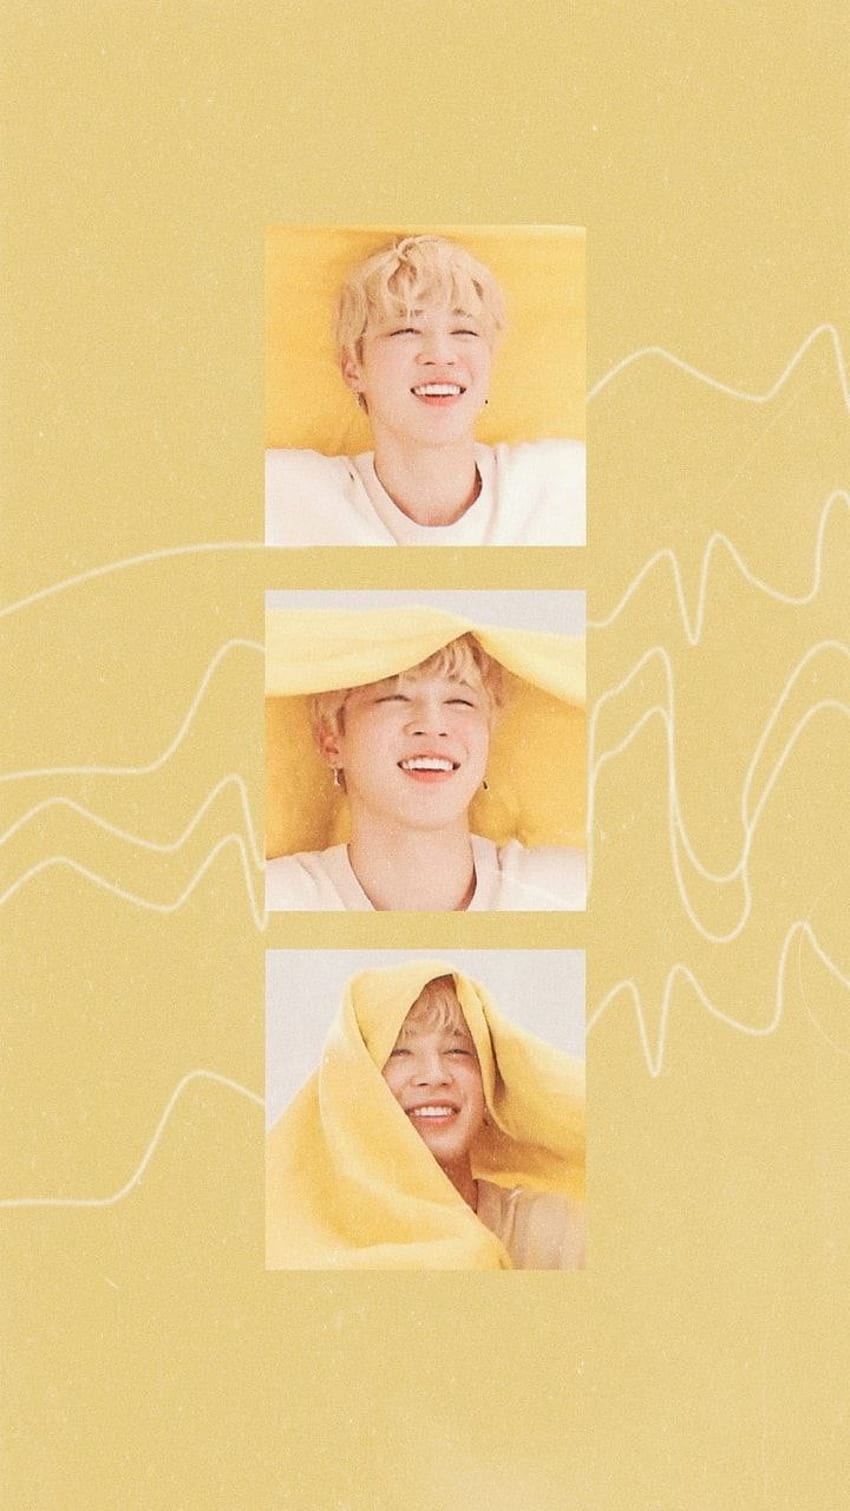 A photo of bts rm in a yellow aesthetic - Smile